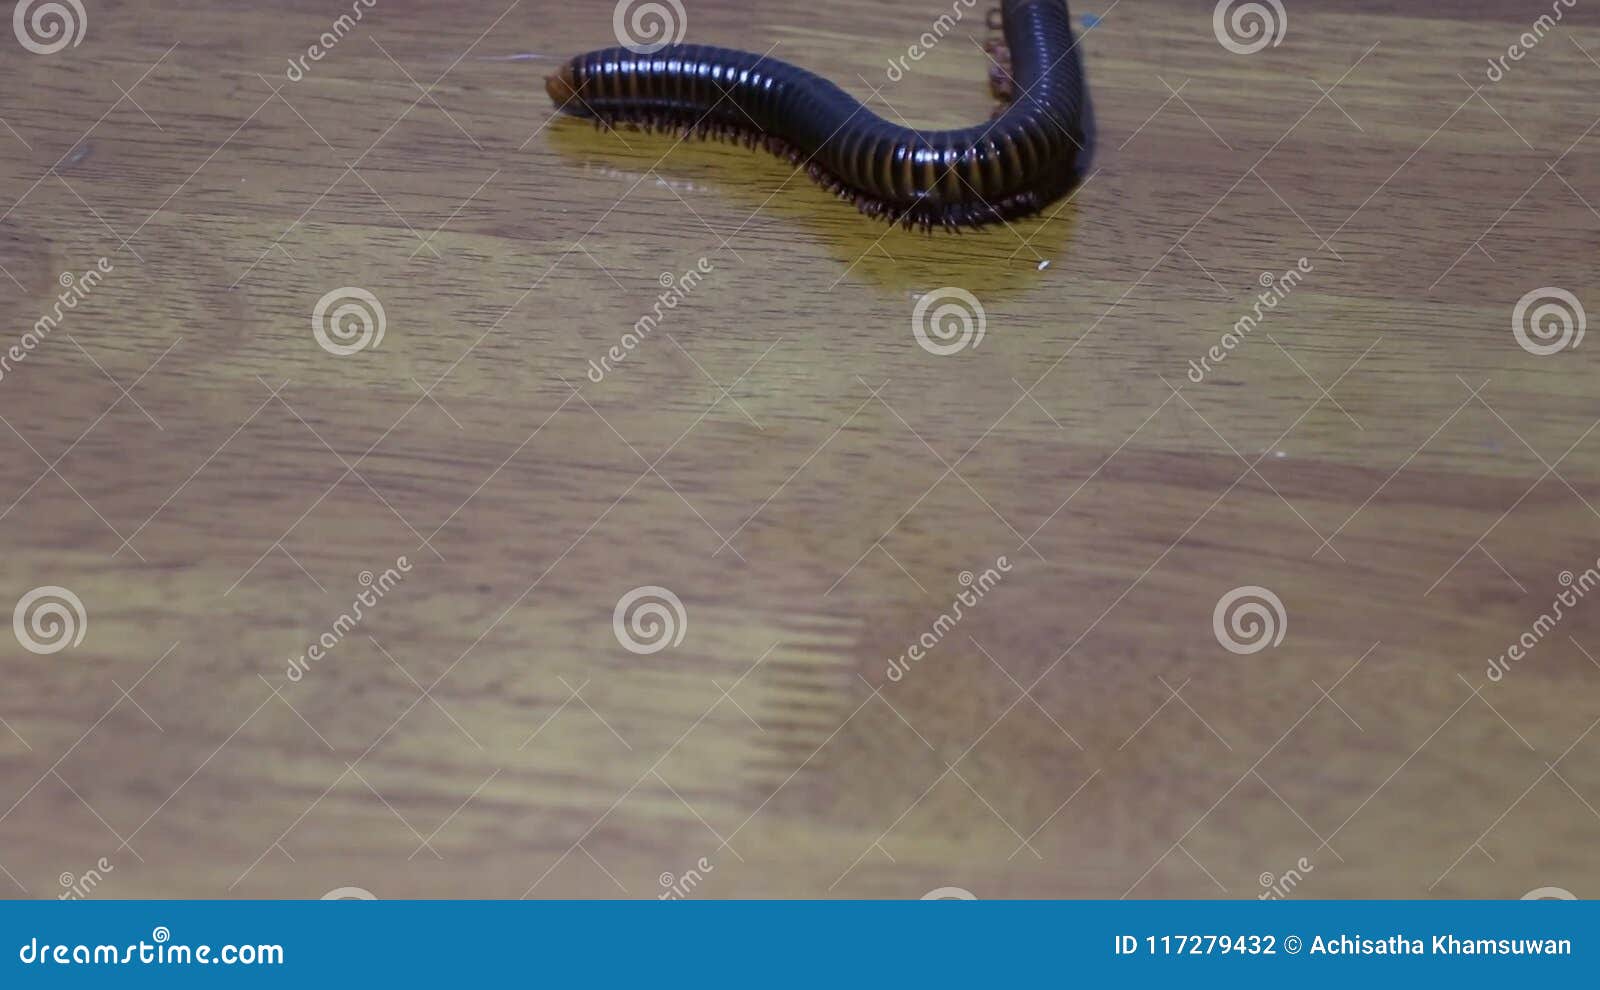 Millipede Walking On The Wooden Floor Millipedes Are Those Long